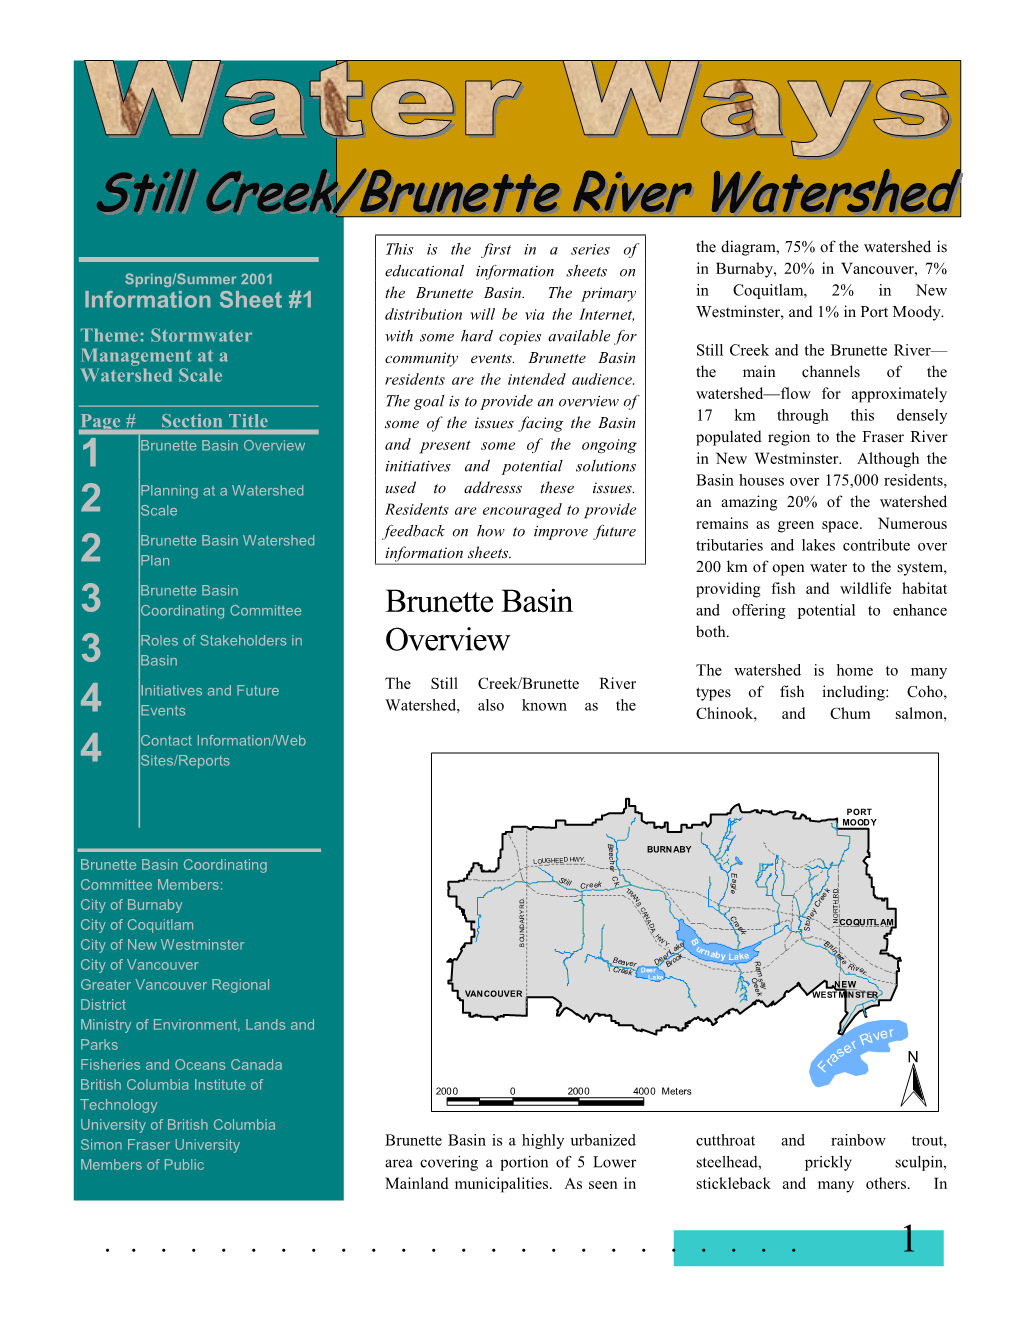 Brunette Basin Overview and Present Some of the Ongoing 1 Initiatives and Potential Solutions in New Westminster